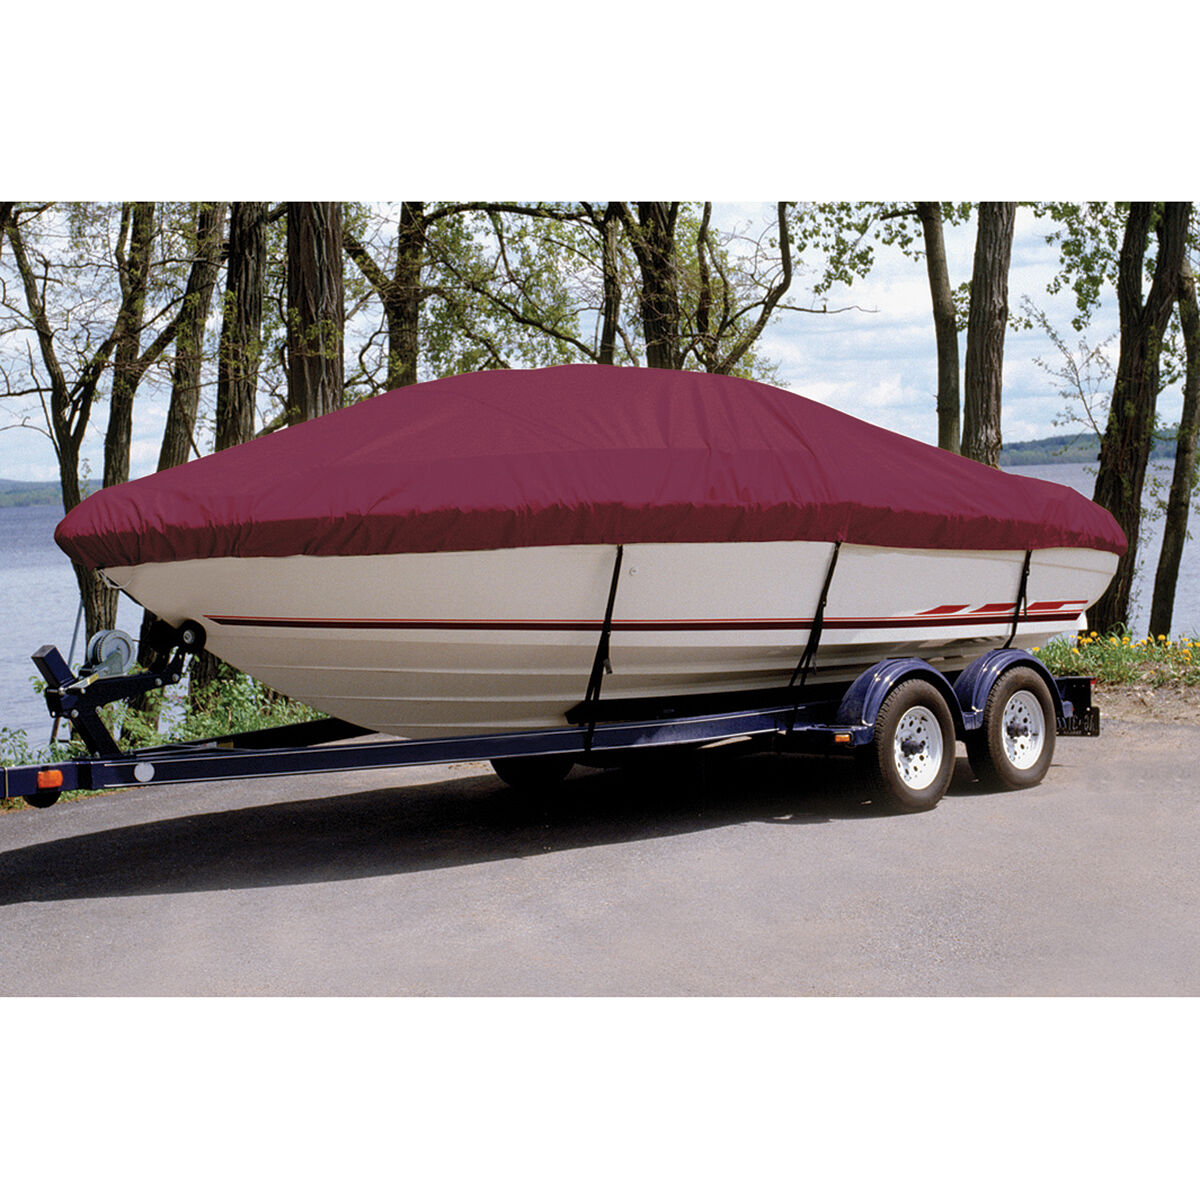 Taylor Made Trailerite Ultima Cover for 96-04 Ski Centurion Elite Bow Rider/V-Dr Boat Cover in Cranberry Polyester